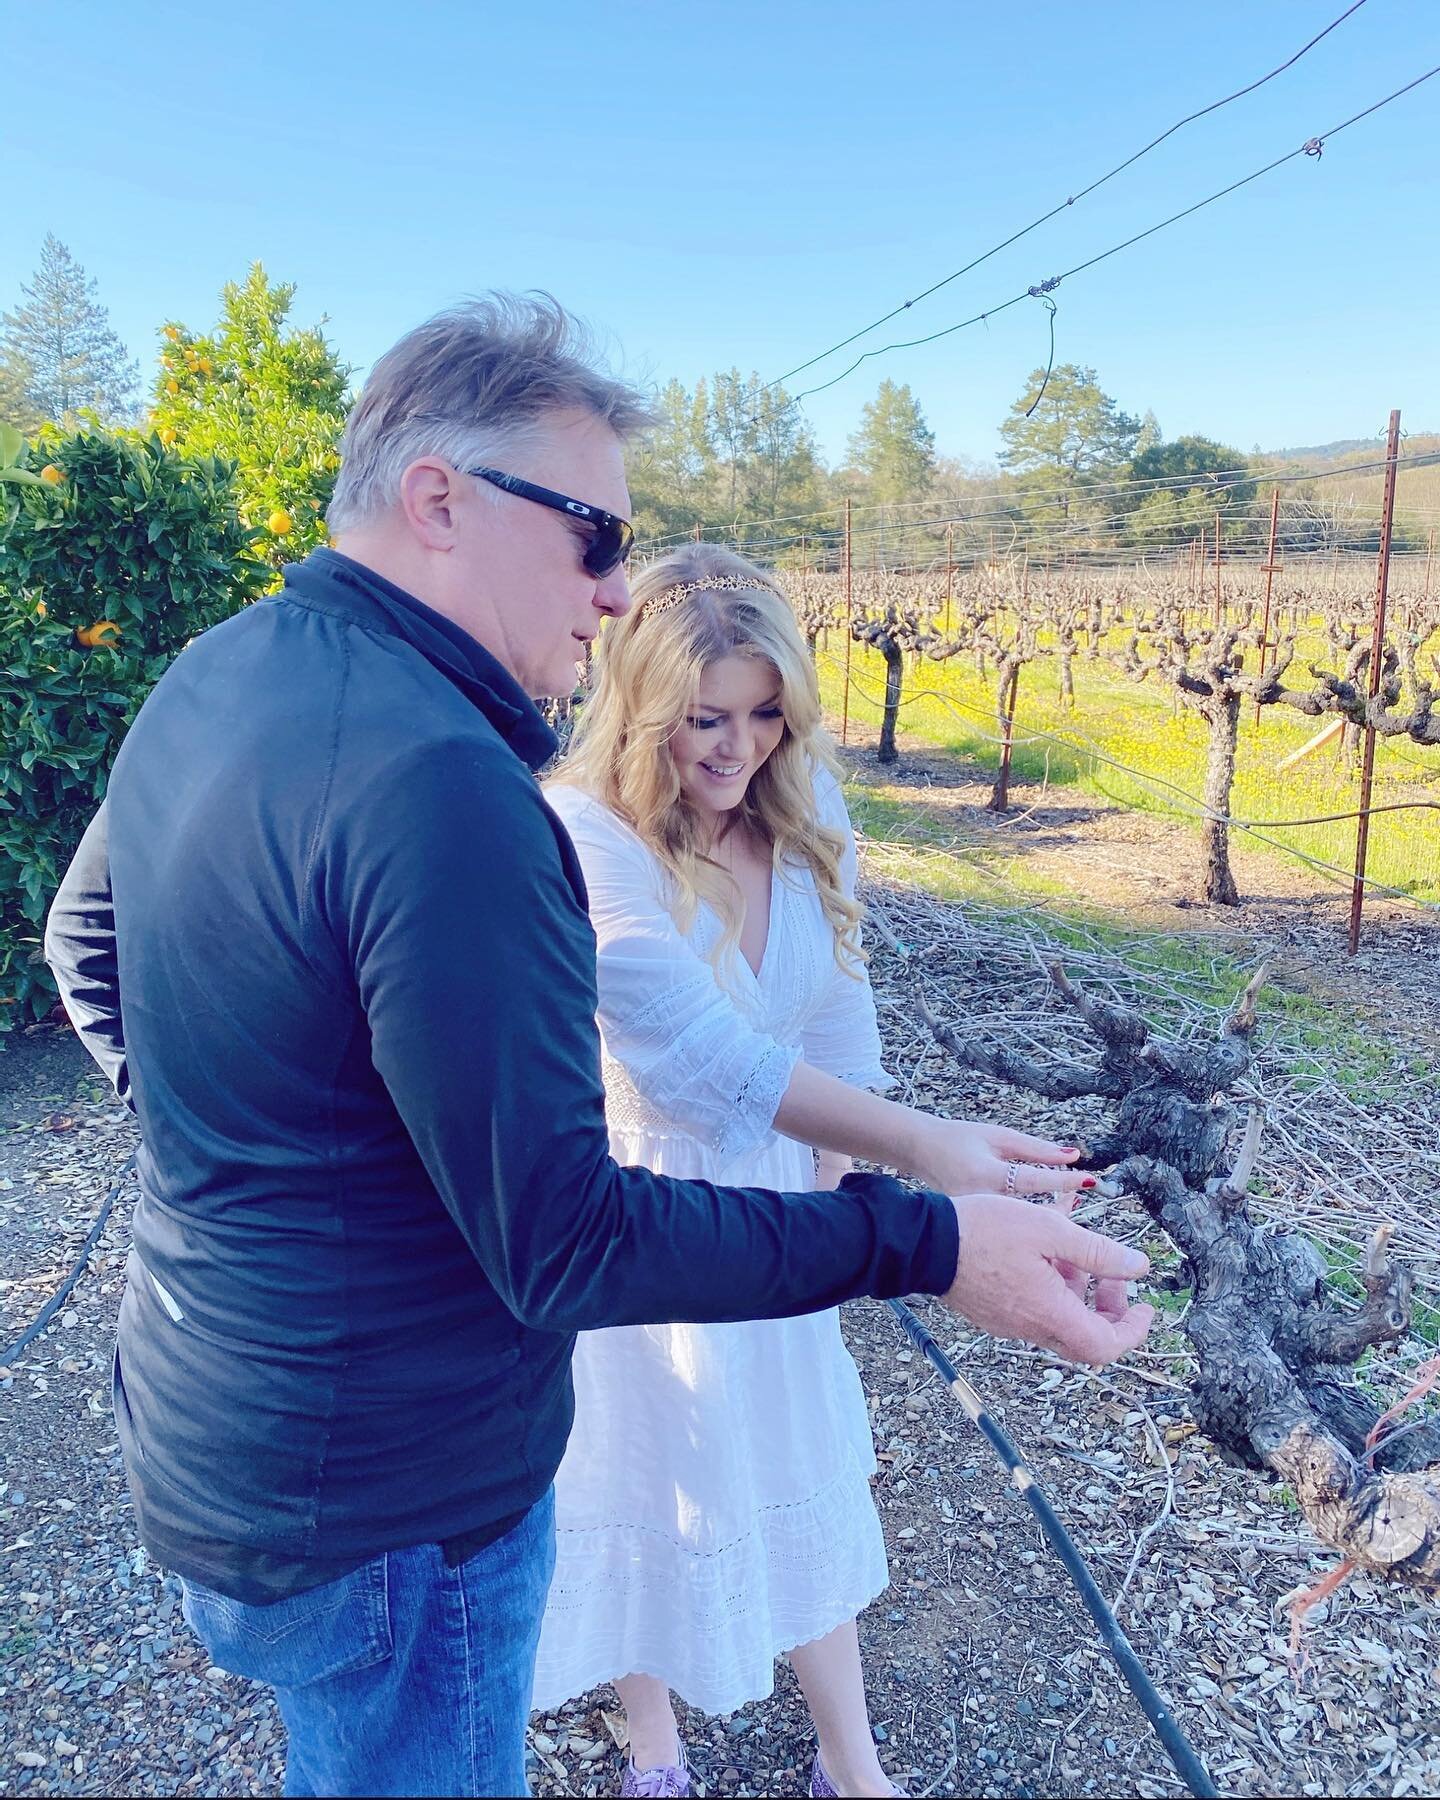 I miss traveling 🙈 Our last trip was just about a year ago to Sonoma to check out the new growth in the @vanderpumpwines vineyards with our wonderful winemaker Tom, and bottling our 2017 Cabernet &amp; 2019 Chardonnay! Can&rsquo;t wait to get back t